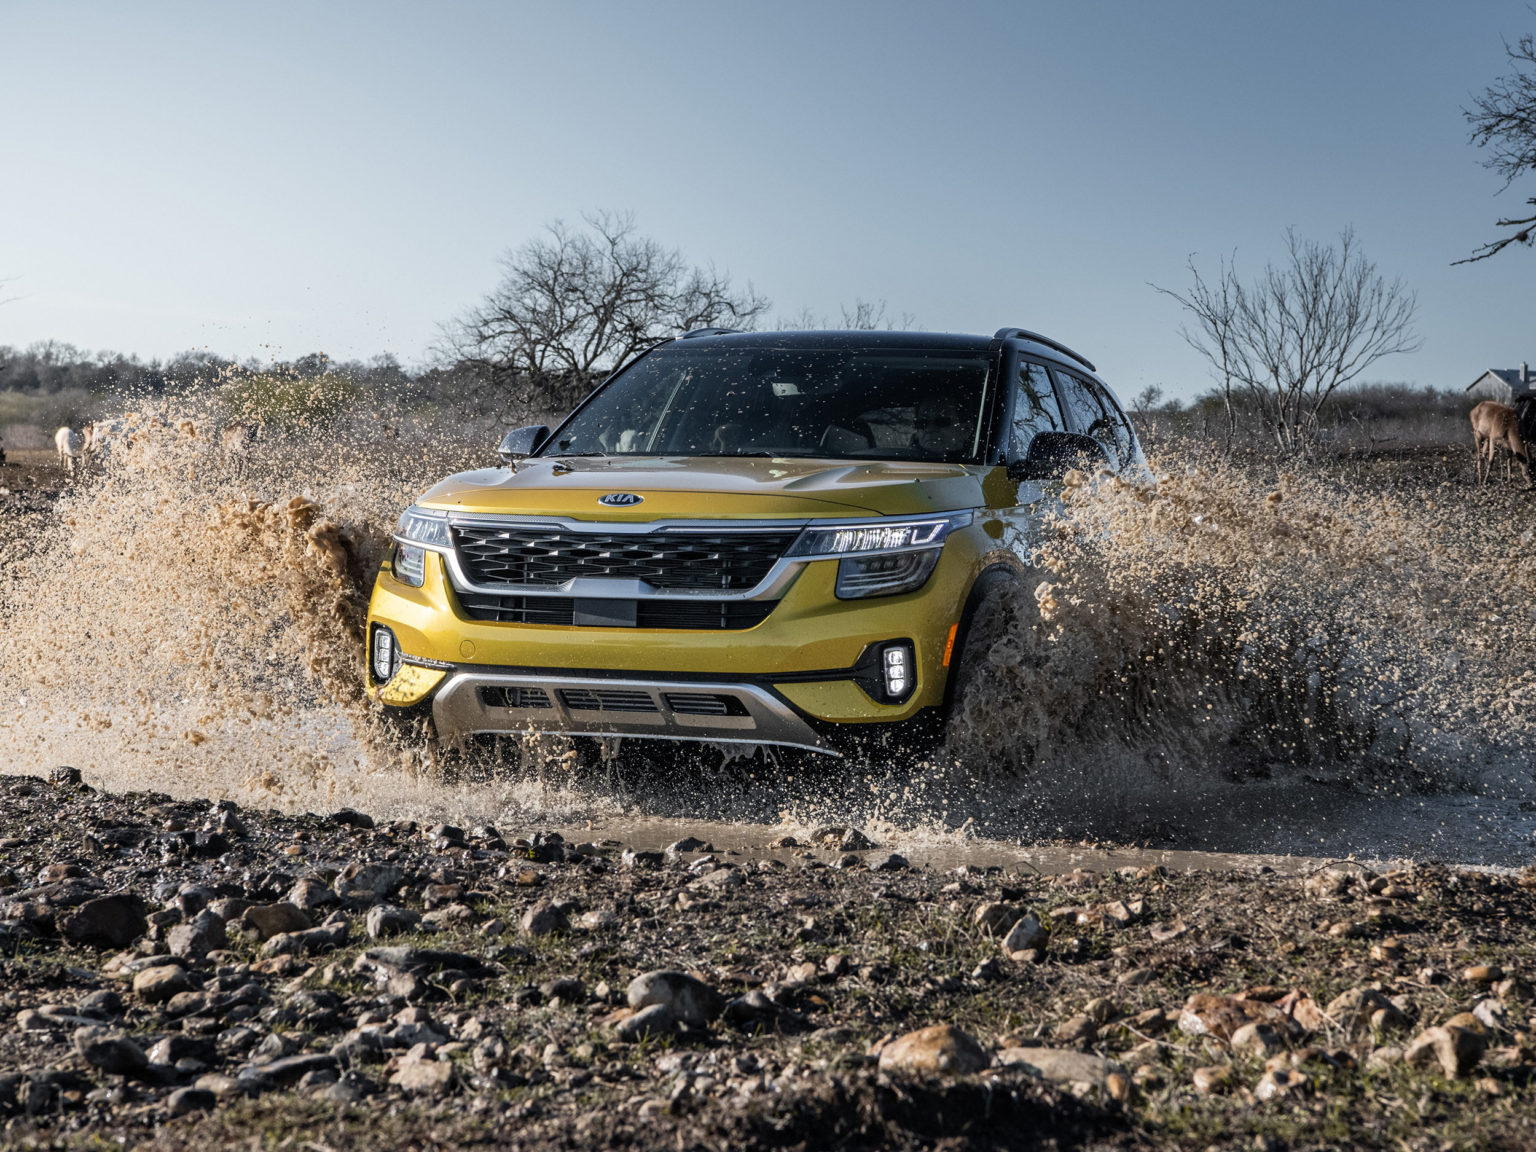 The adventure-ready Kia Seltos has debuted to a long list of accolades.